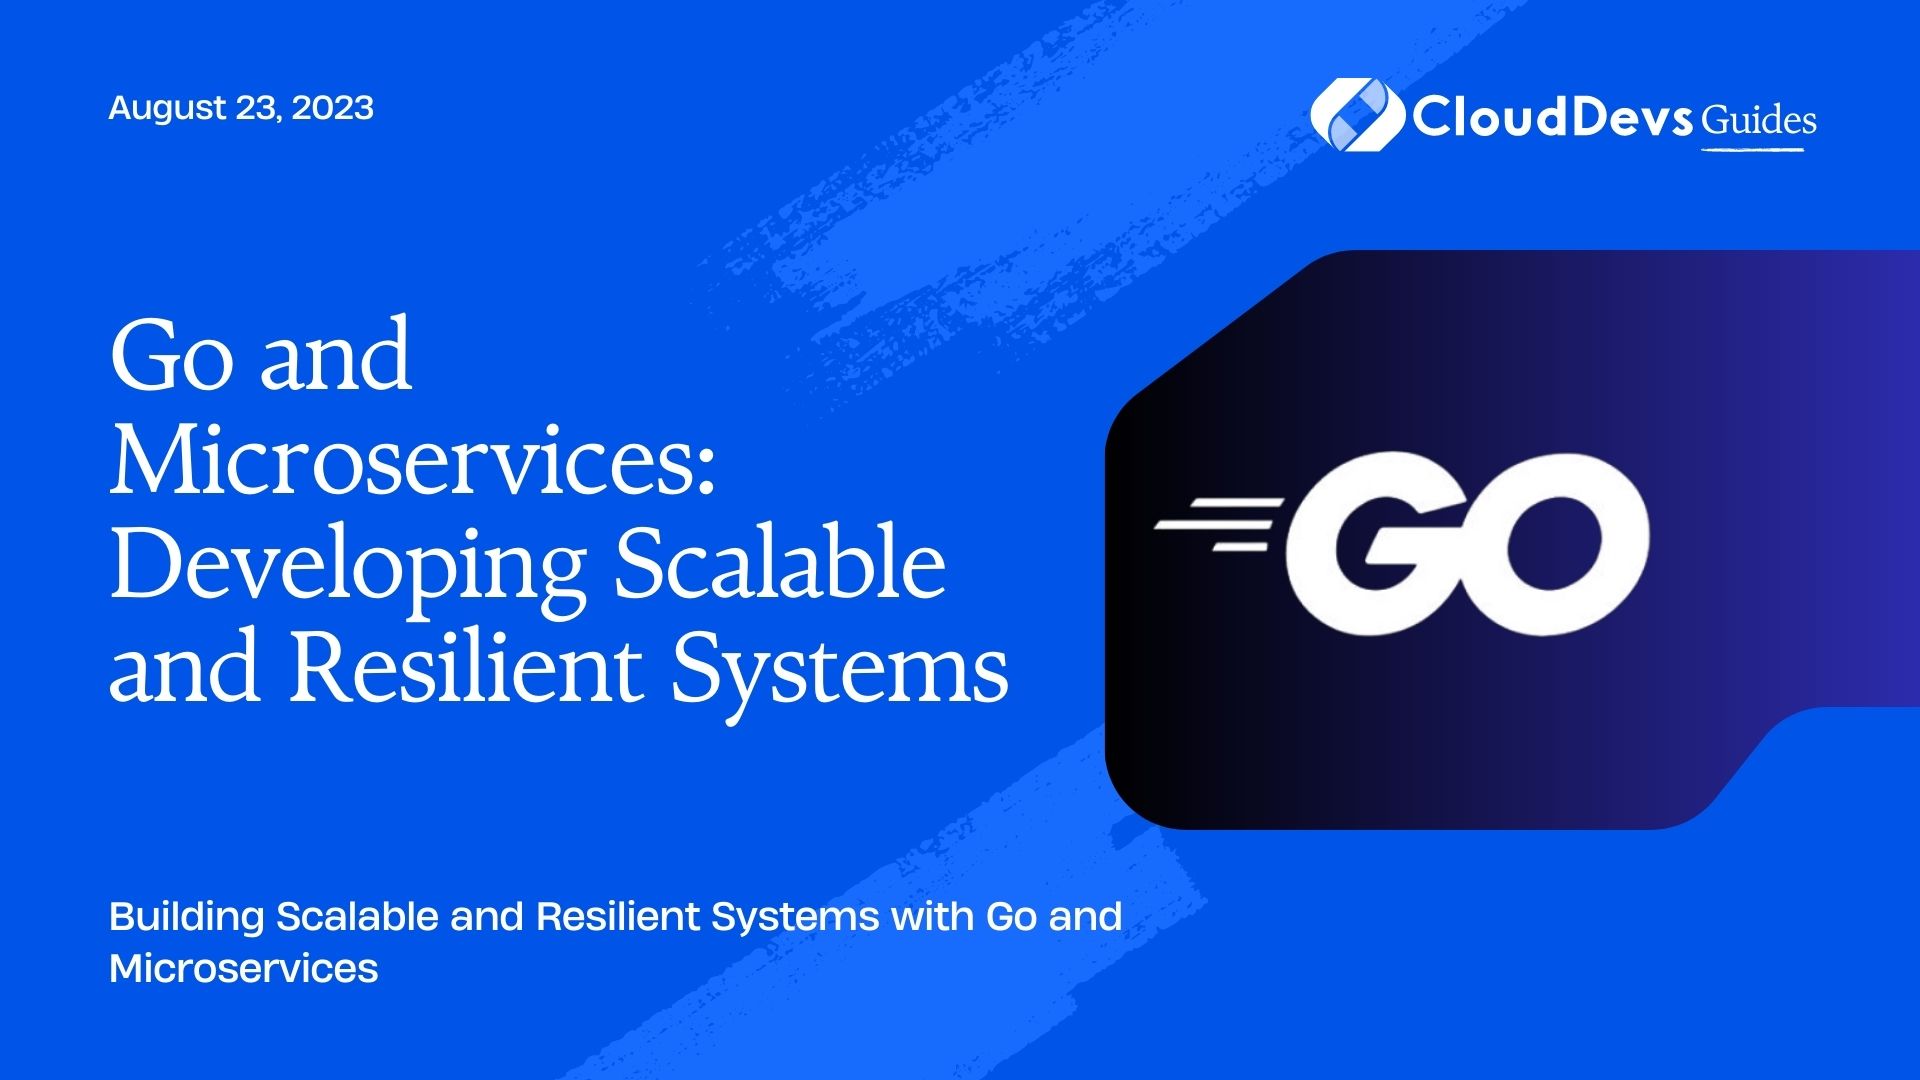 Go and Microservices: Developing Scalable and Resilient Systems